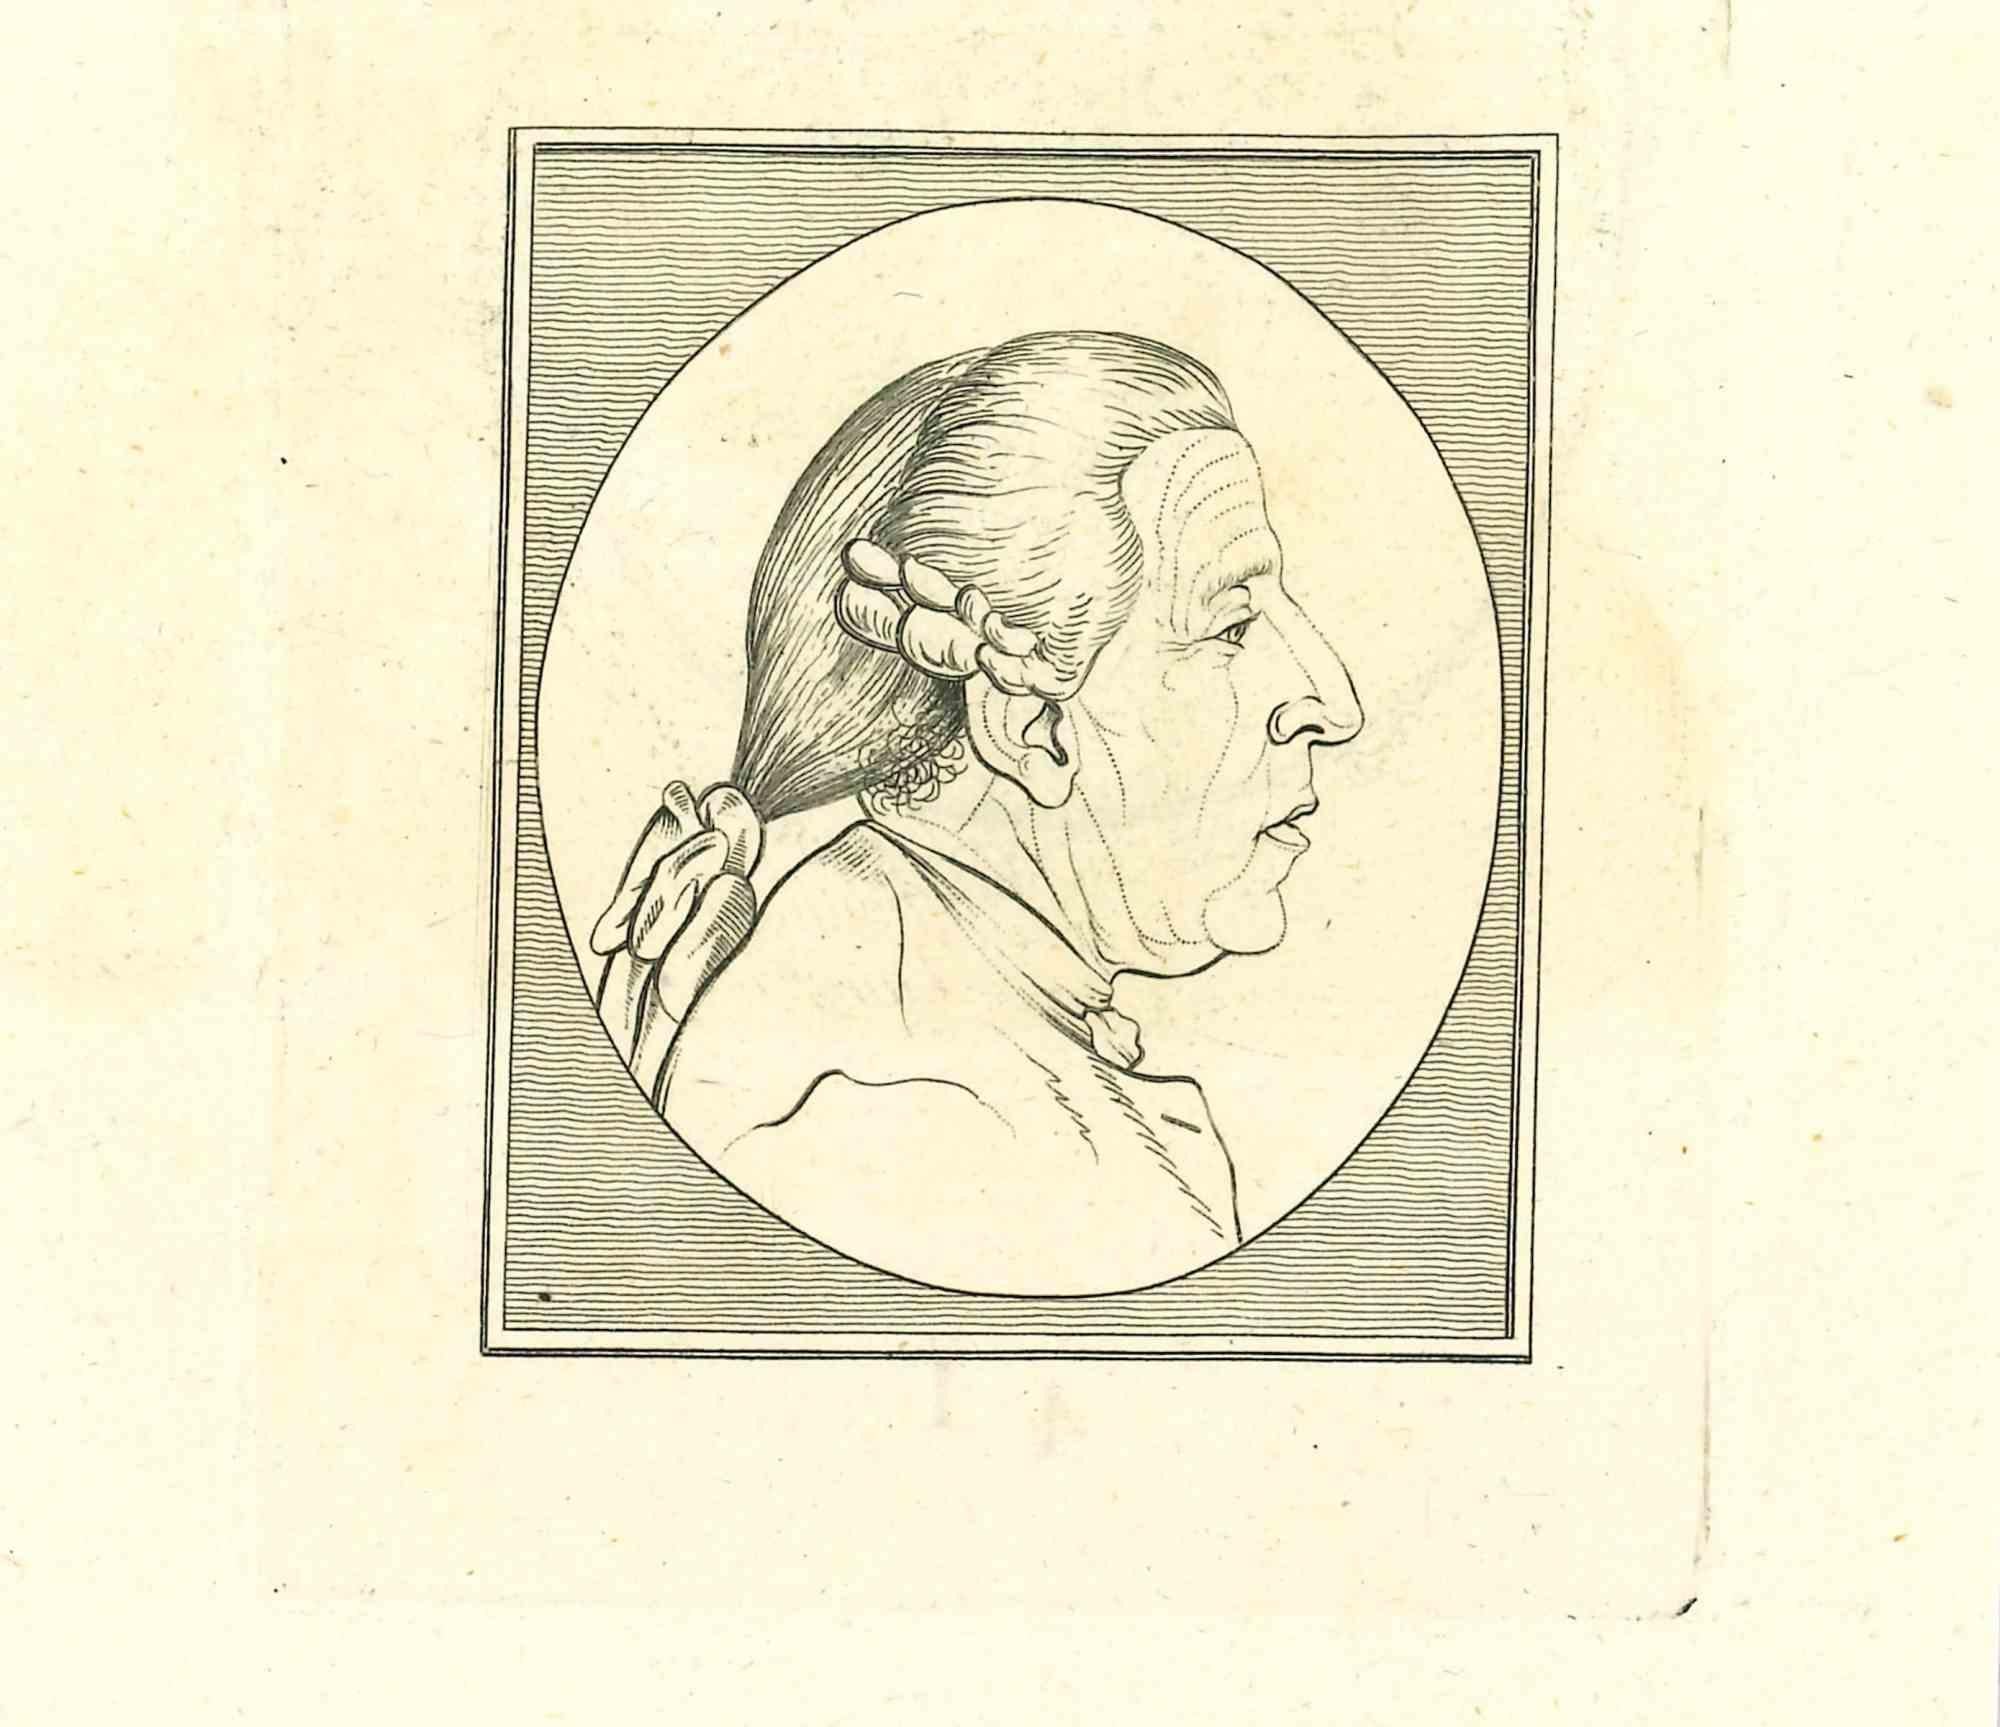 The Profile is an original etching artwork realized by Thomas Holloway for Johann Caspar Lavater's "Essays on Physiognomy, Designed to Promote the Knowledge and the Love of Mankind", London, Bensley, 1810. 

With the image on the rear.

Good